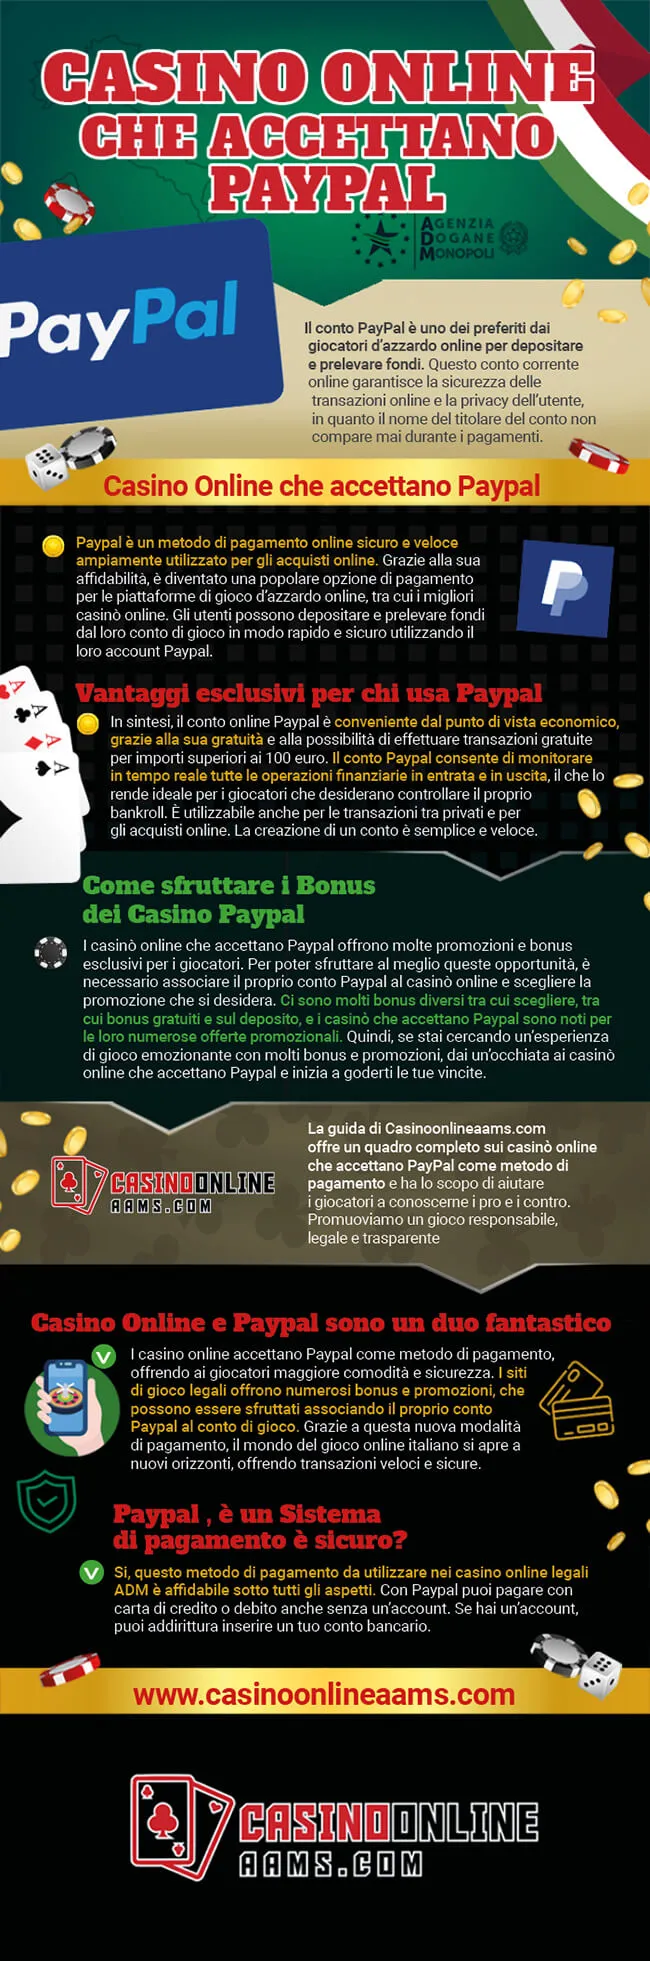 How To Be In The Top 10 With casinò con paypal